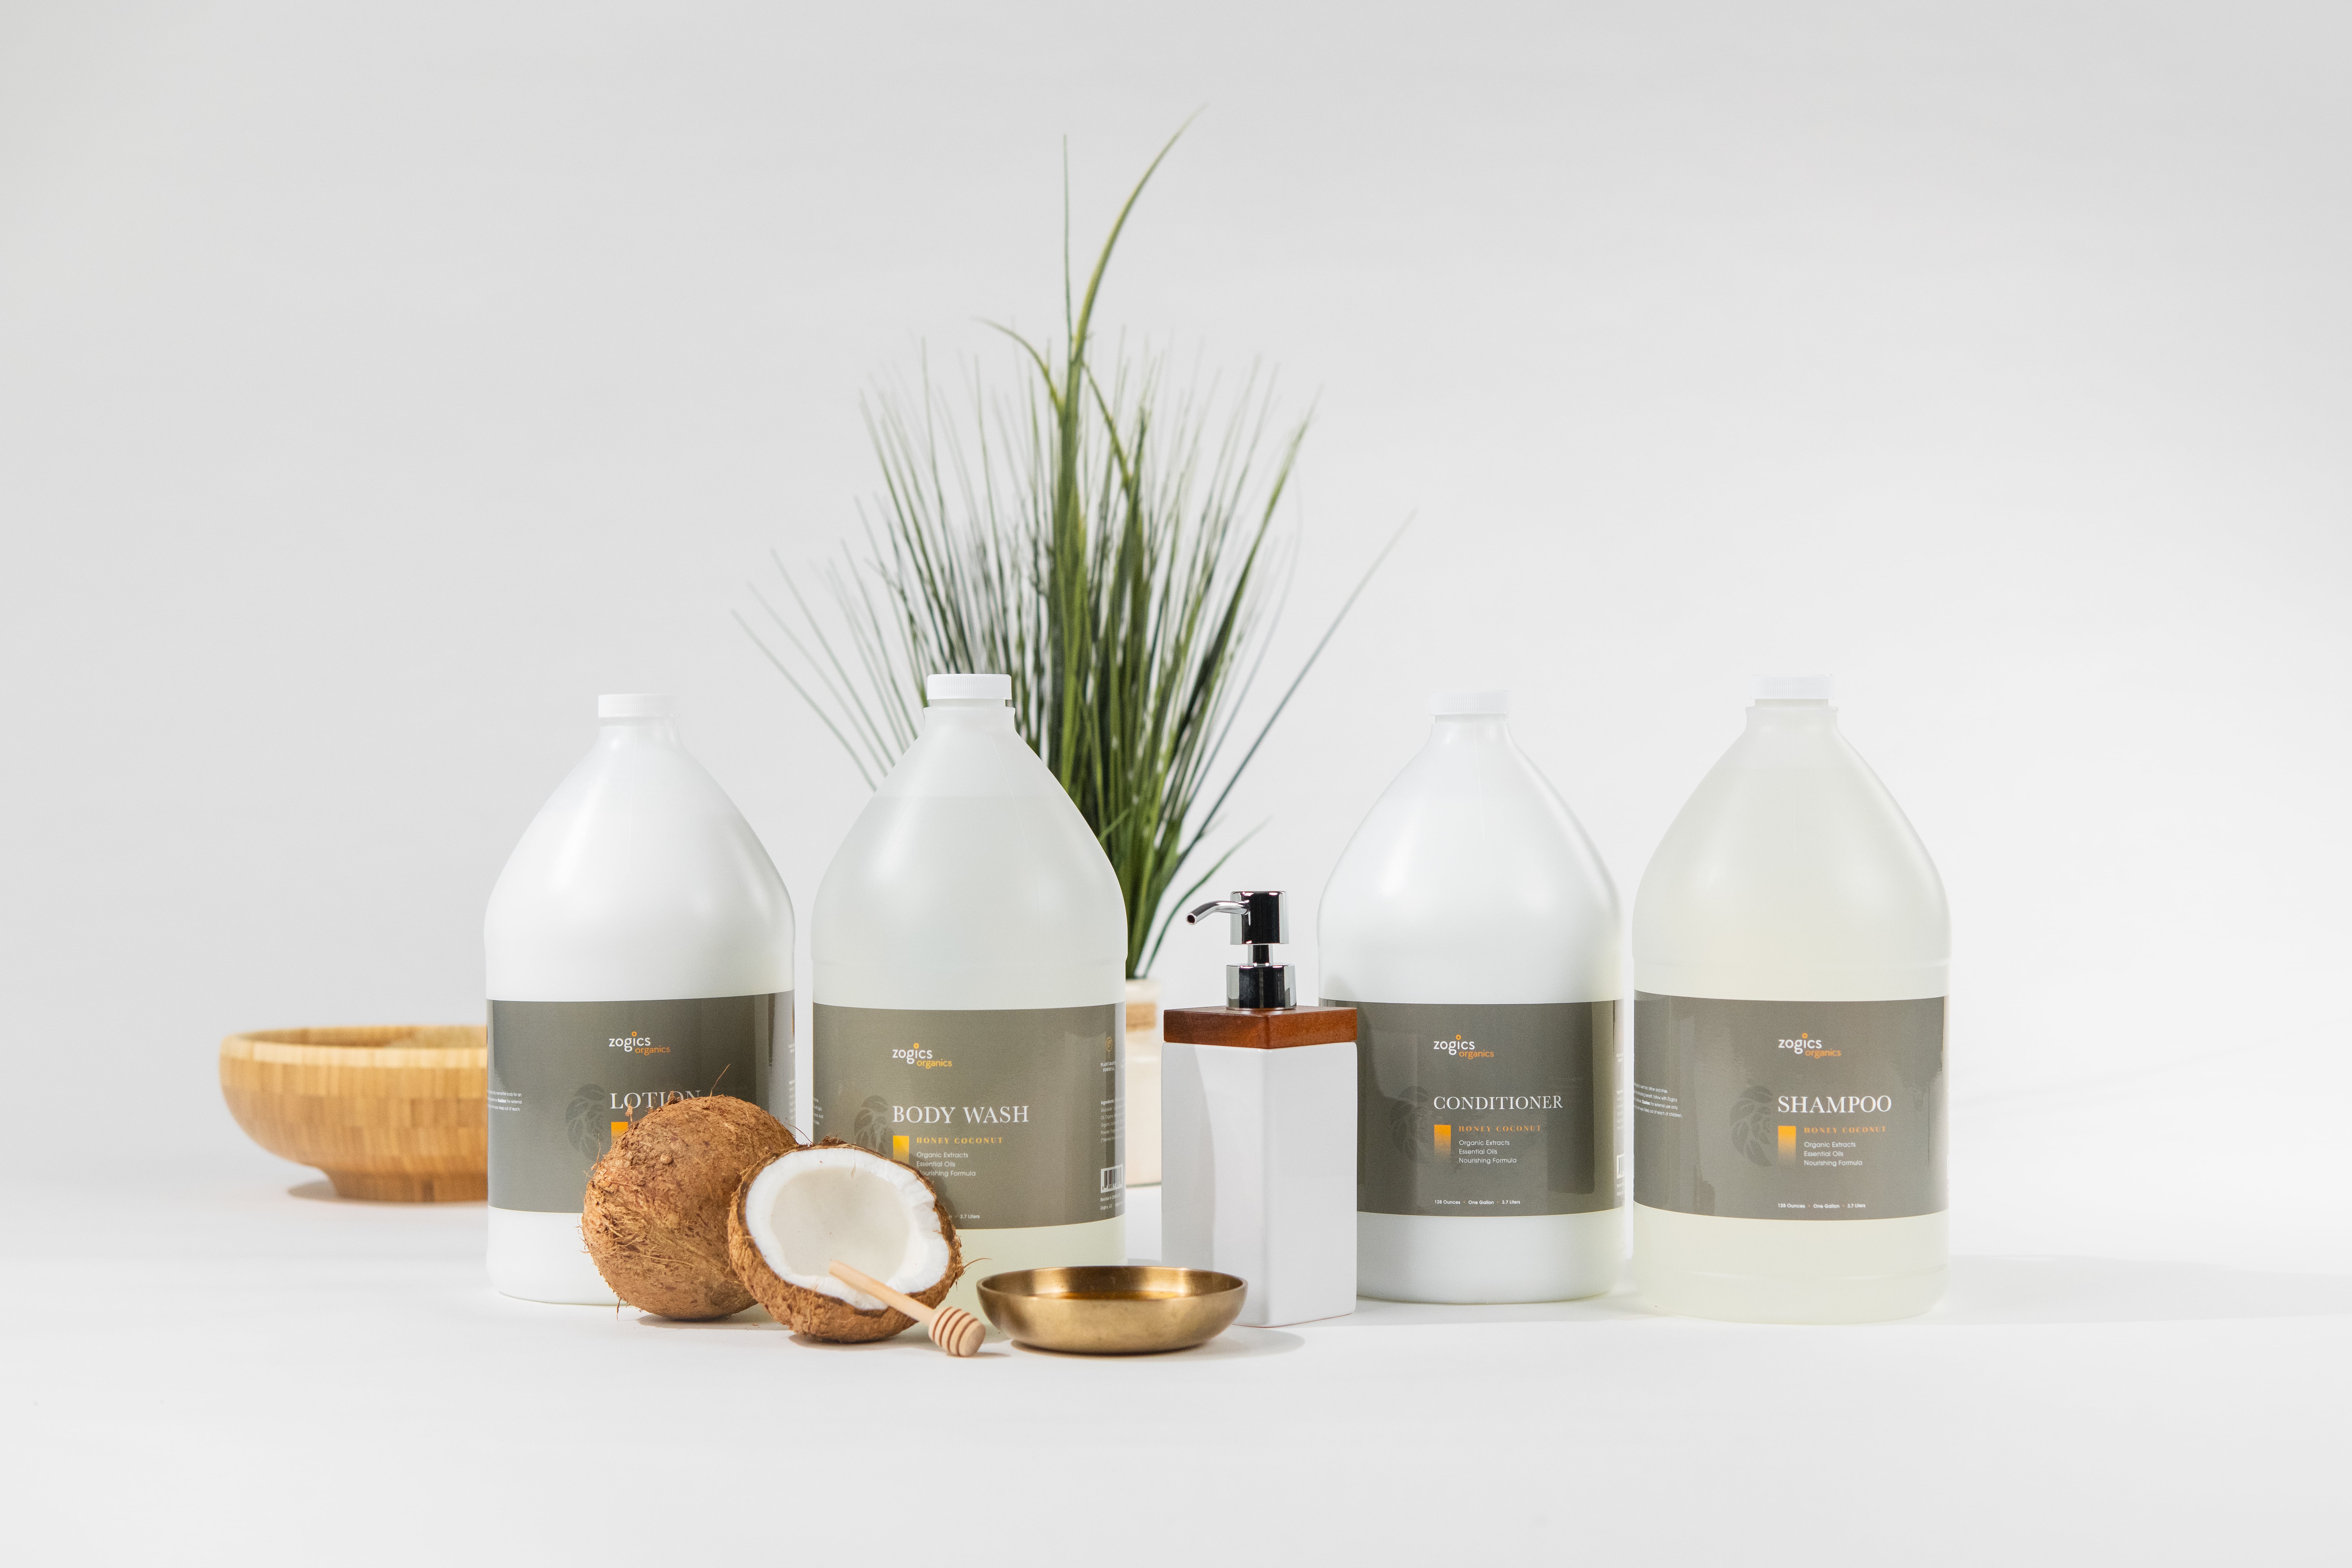 Zogics Organics bath and body care for hotels and Airbnbs